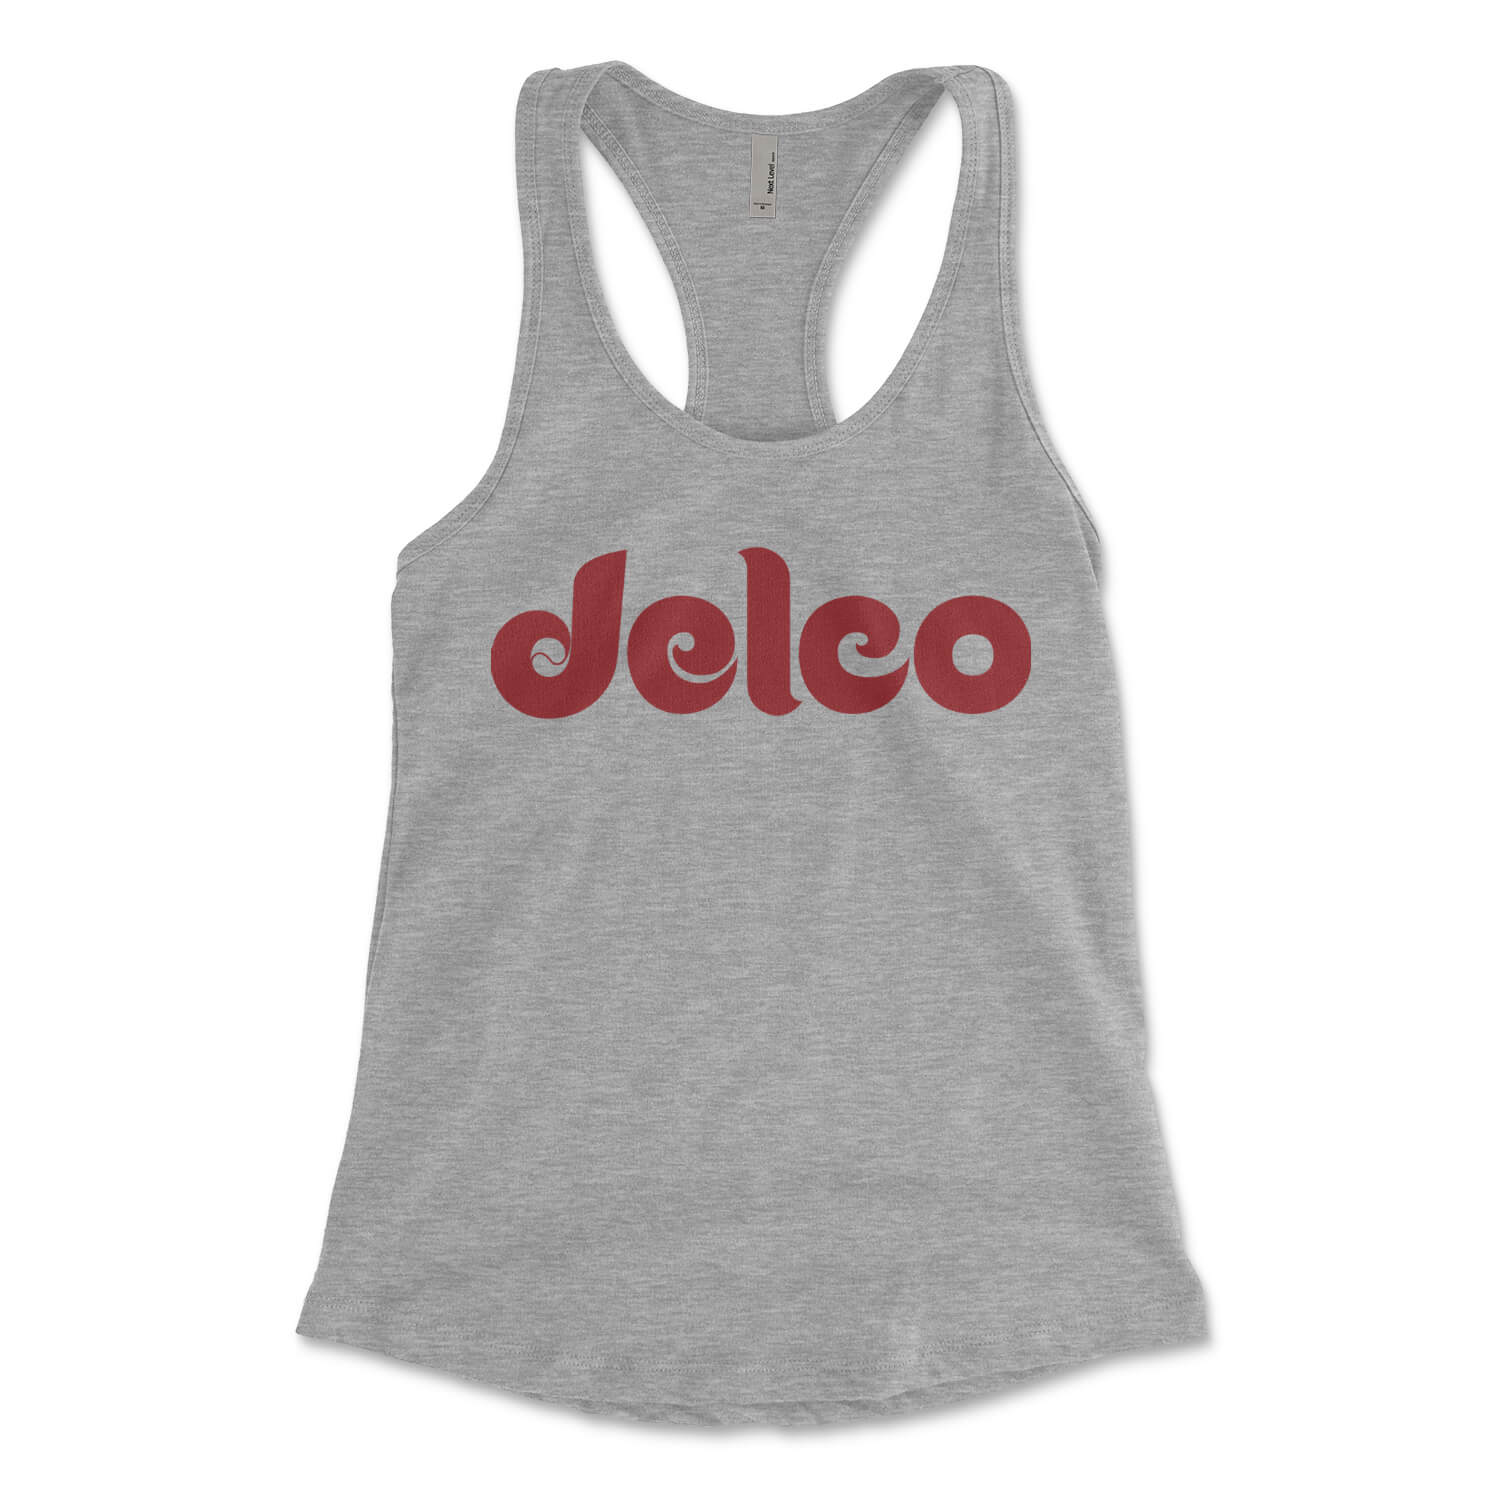 Delco heather grey womens racerback tank top from Phillygoat